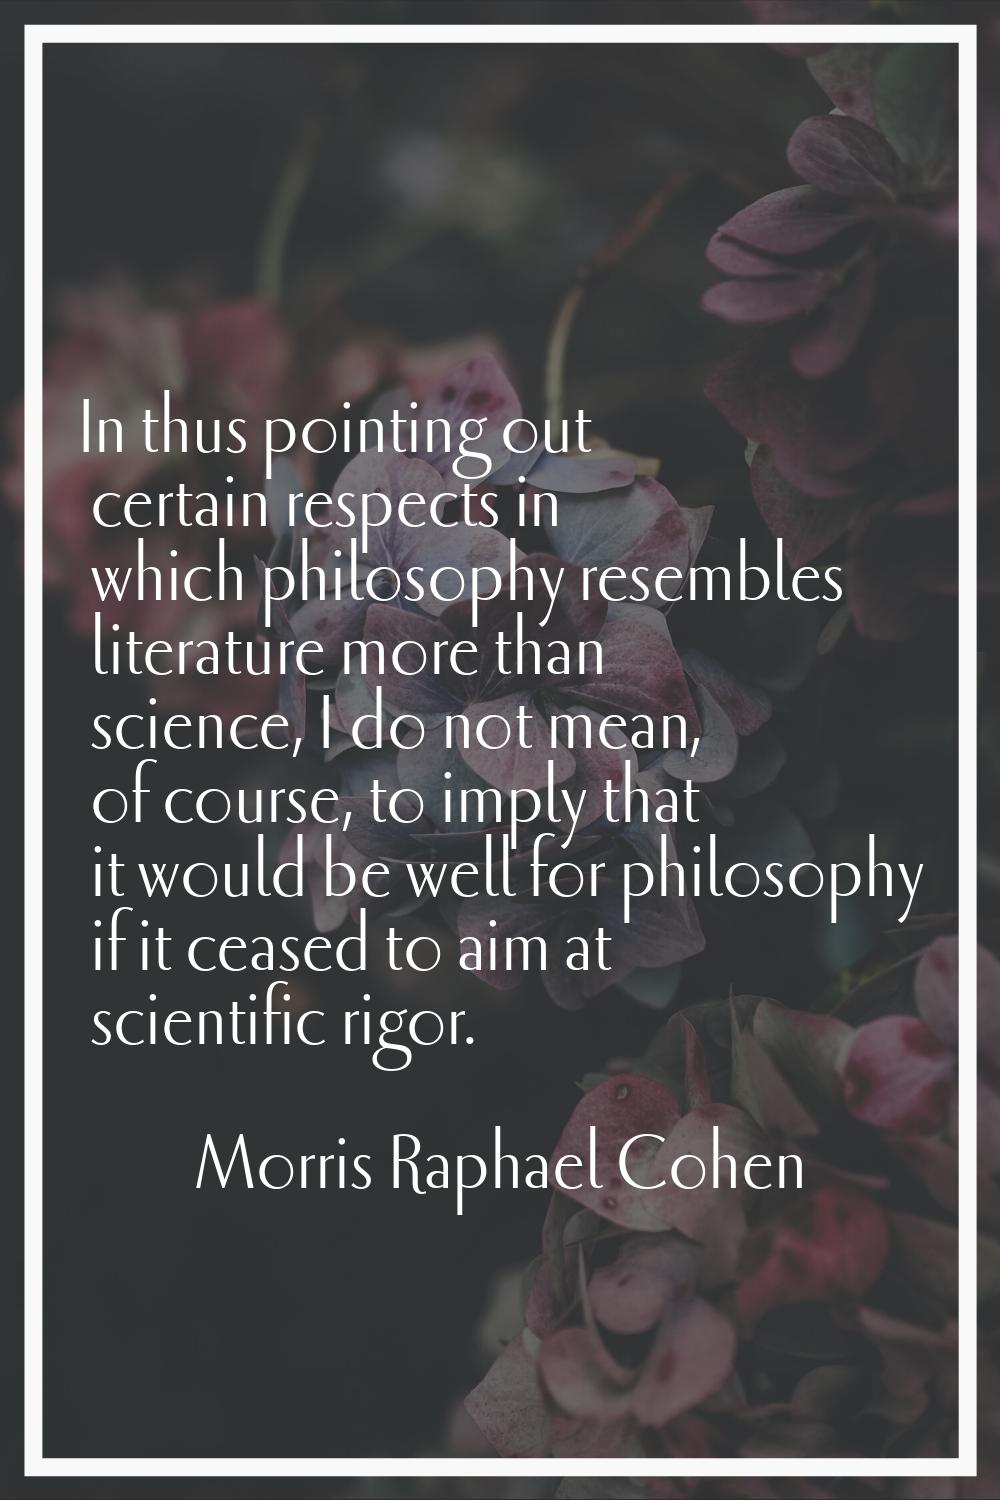 In thus pointing out certain respects in which philosophy resembles literature more than science, I